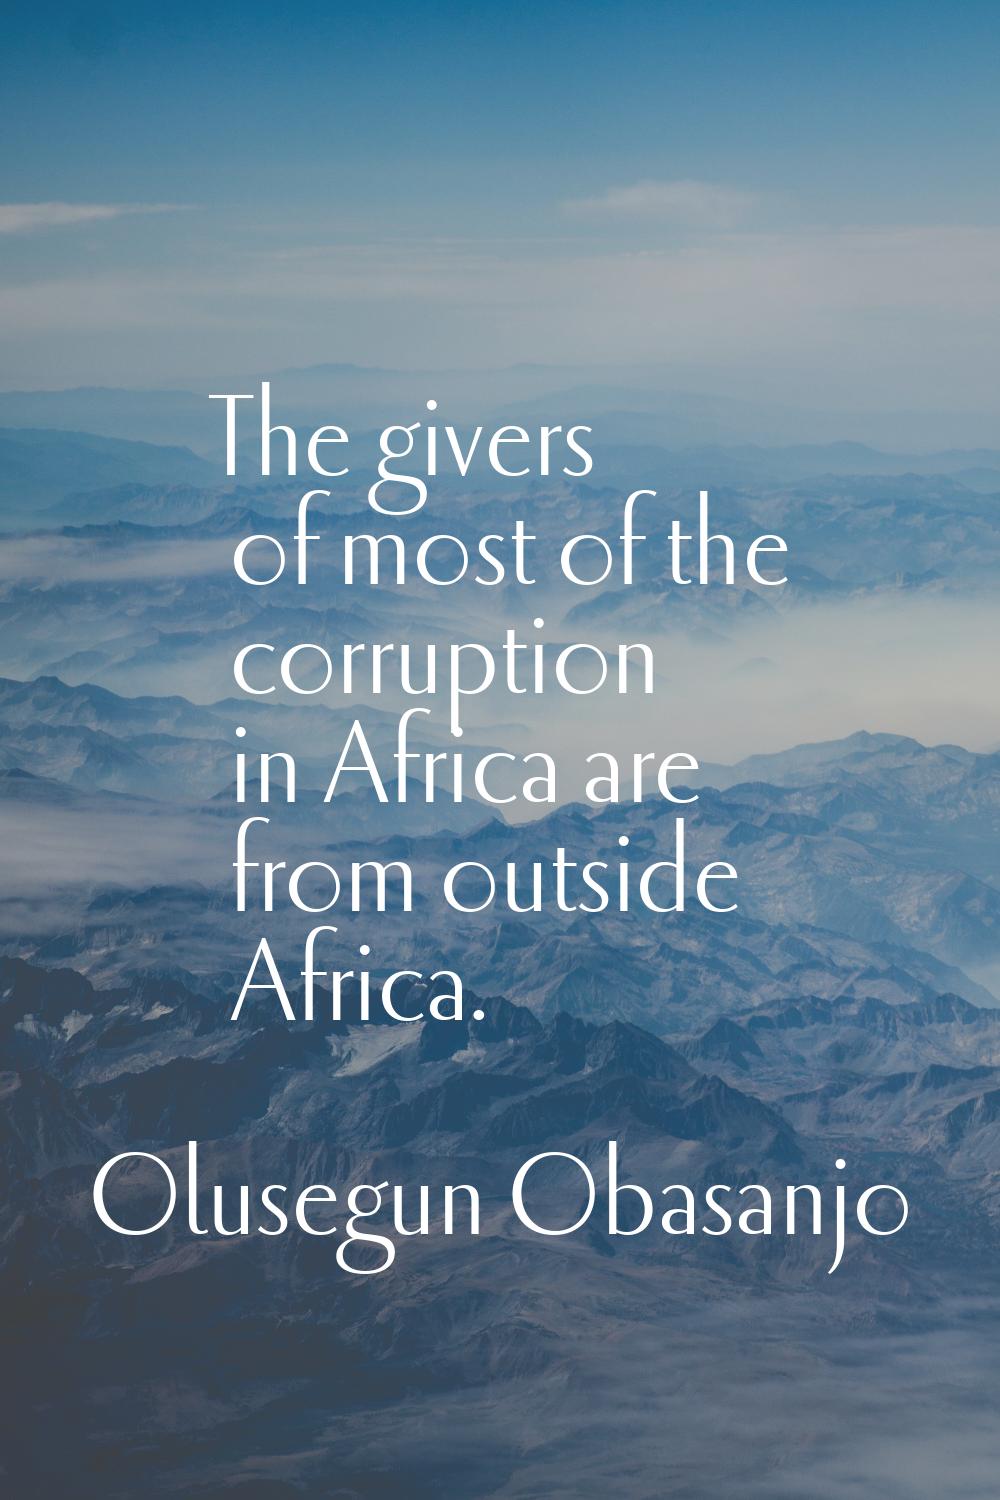 The givers of most of the corruption in Africa are from outside Africa.